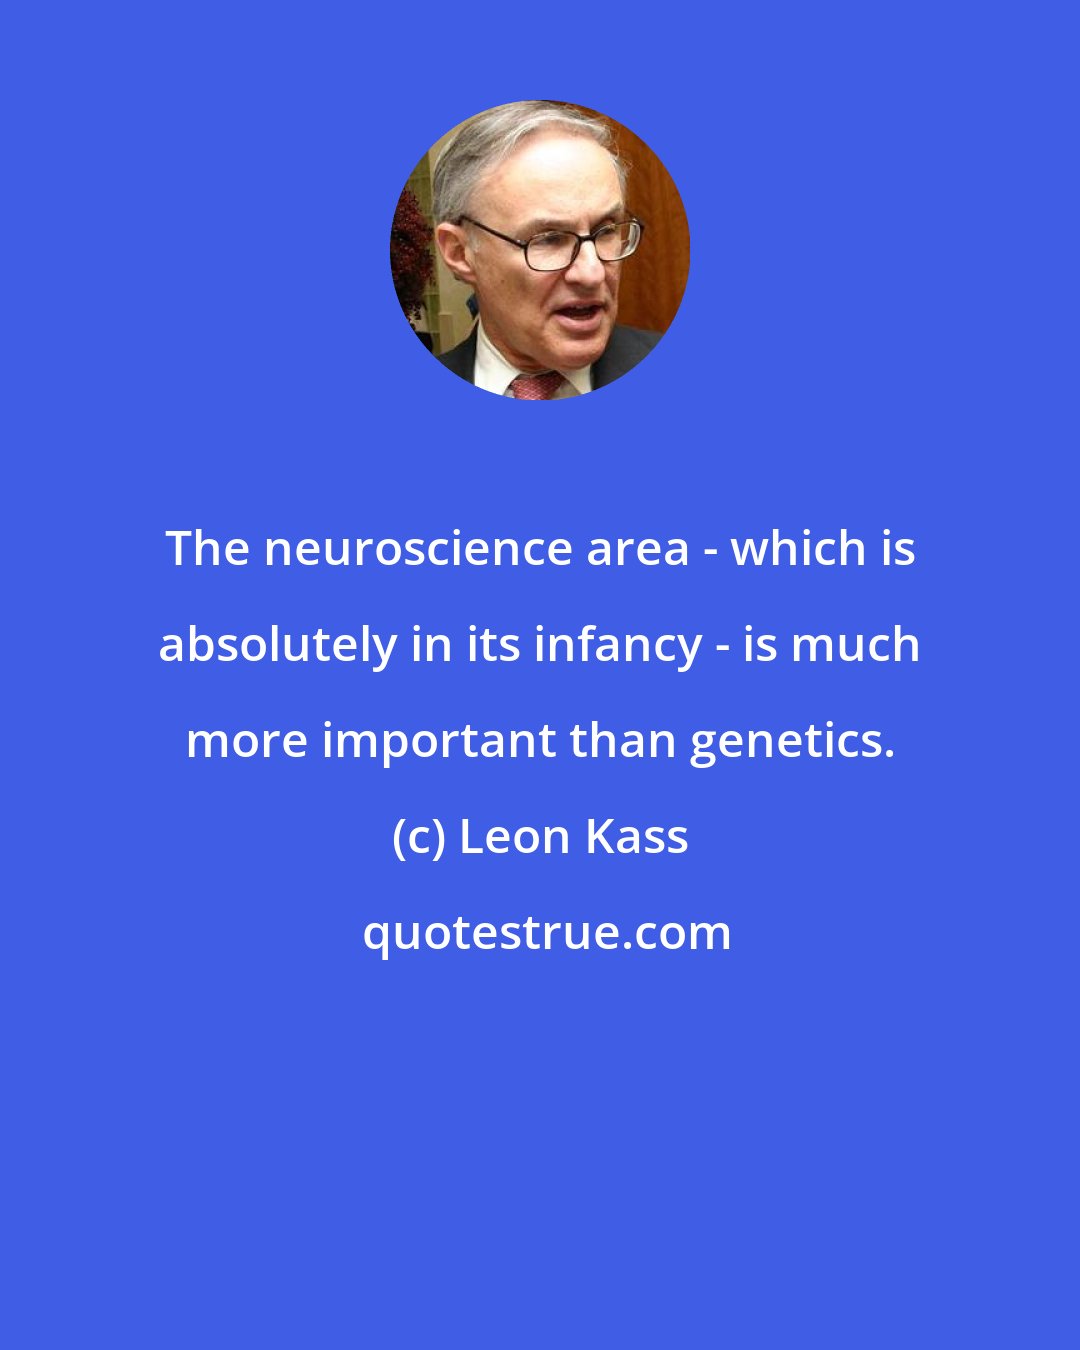 Leon Kass: The neuroscience area - which is absolutely in its infancy - is much more important than genetics.